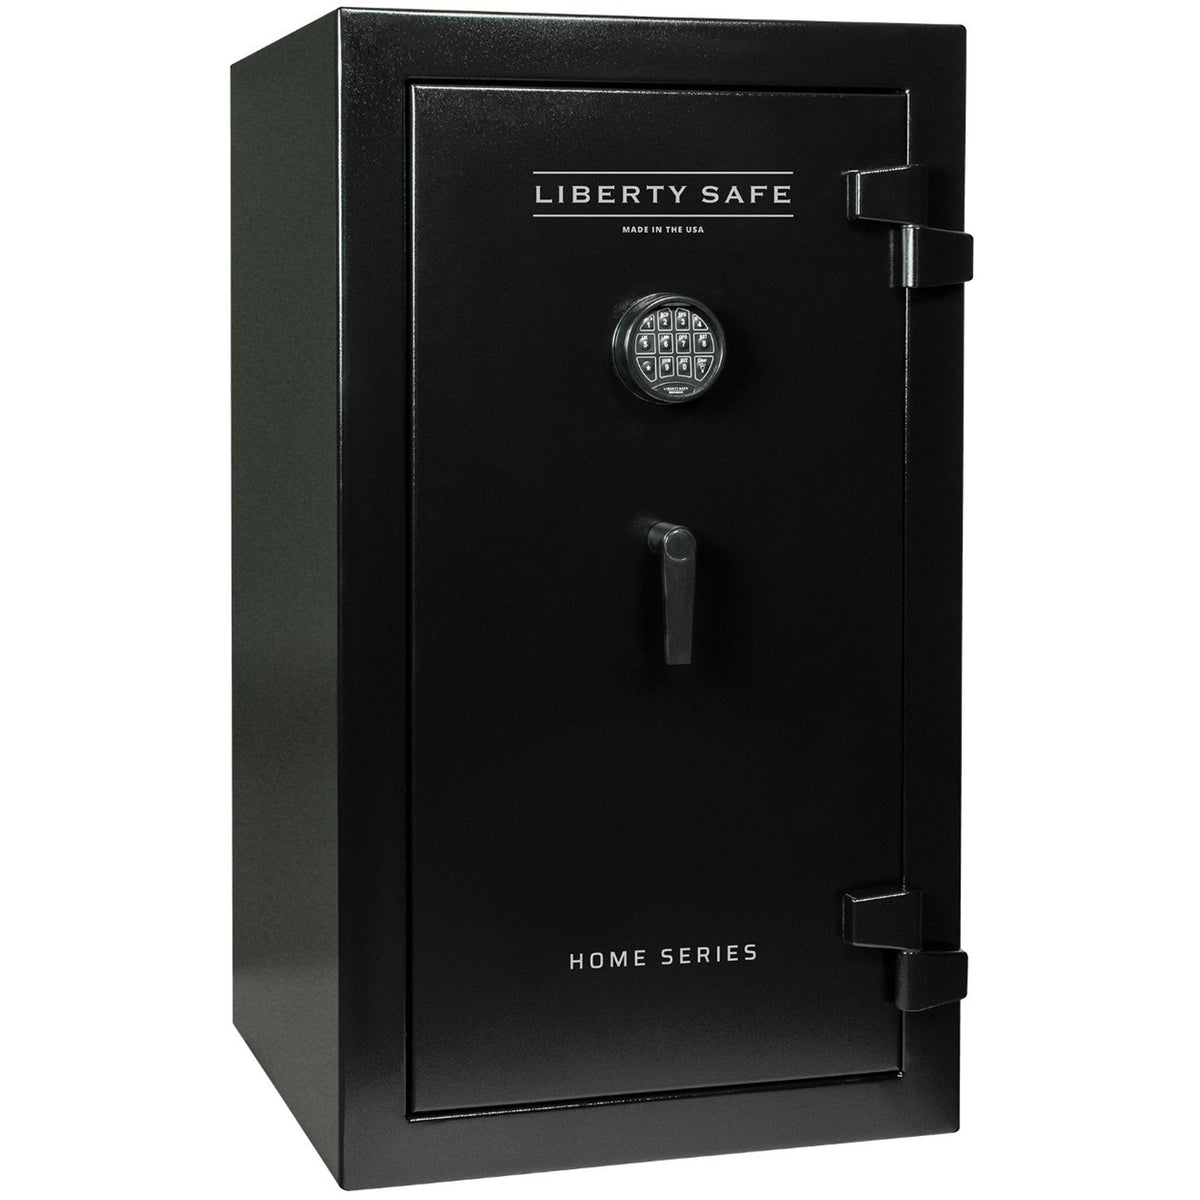 Home Series | 12 | Level 1 Security | 60 Minute Fire Protection | Dimensions 42.125&quot;(H) x 24.125&quot;(W) x 20&quot;(D*) | Textured Black - Closed Door